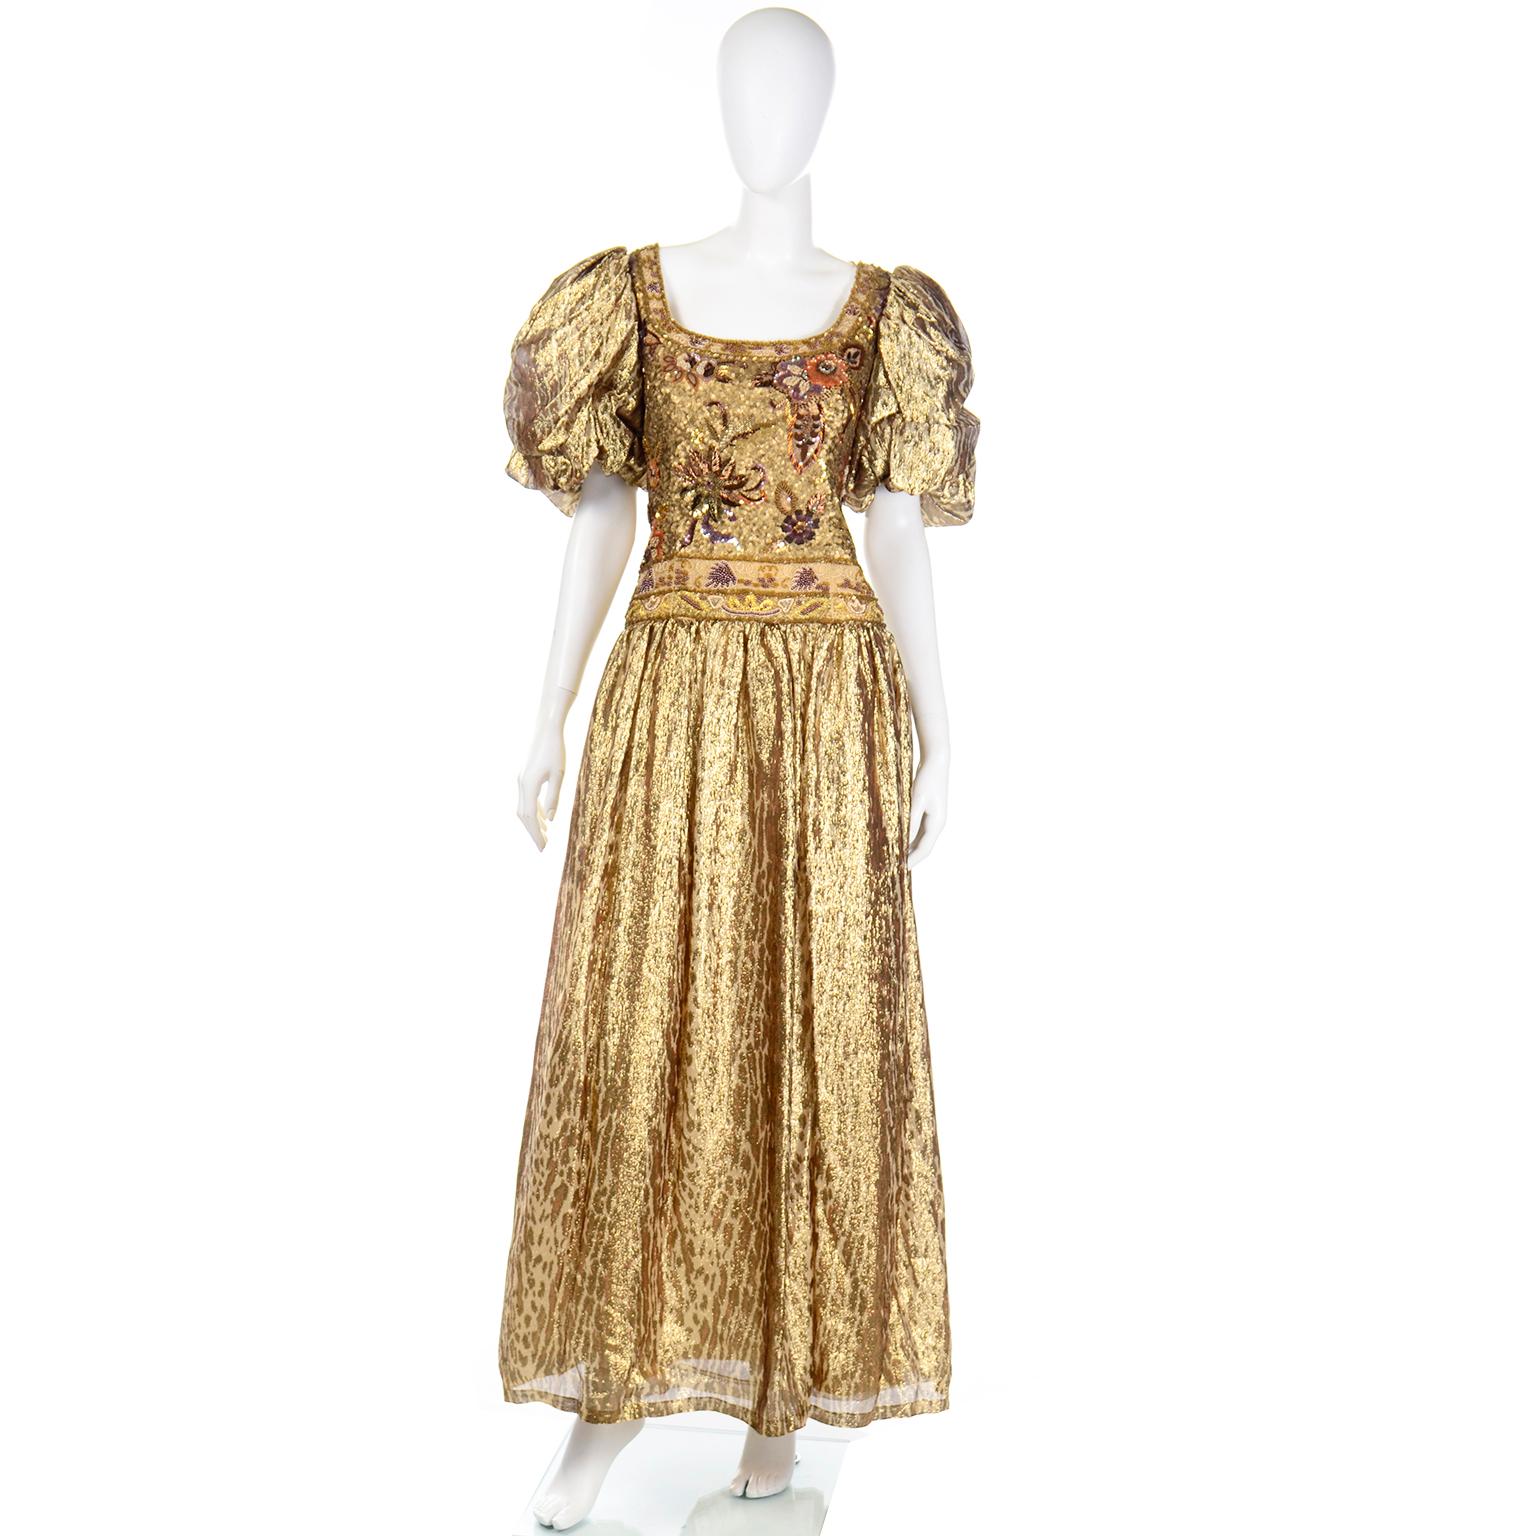 This is a stunning 1980's vintage Richilene New York beaded evening dress in a beautiful metallic gold tissue silk. The skirt and sleeves of the dress are a in a tonal gold leopard print and the bodice is covered with gorgeous beadwork and sequins